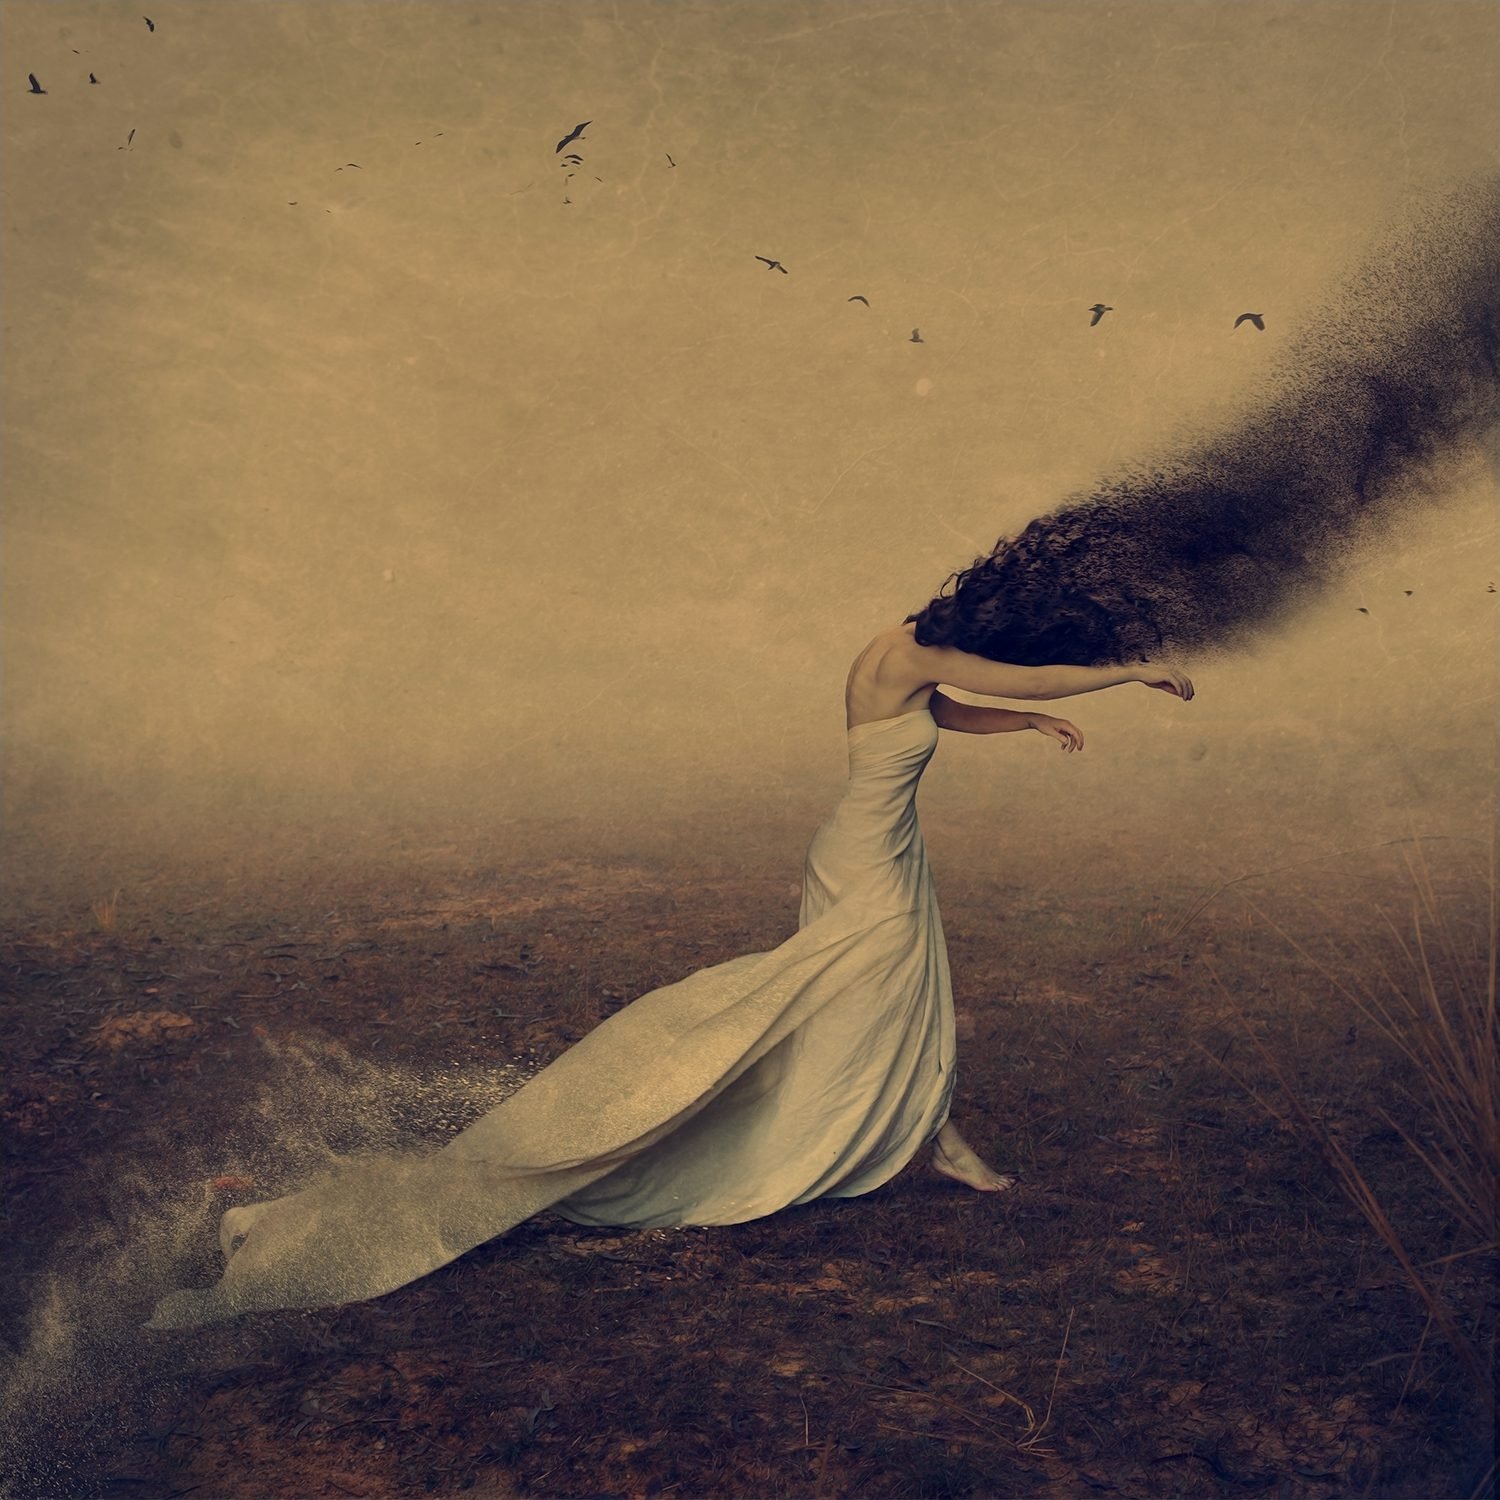 The Shadows We Follow by Brooke Shaden